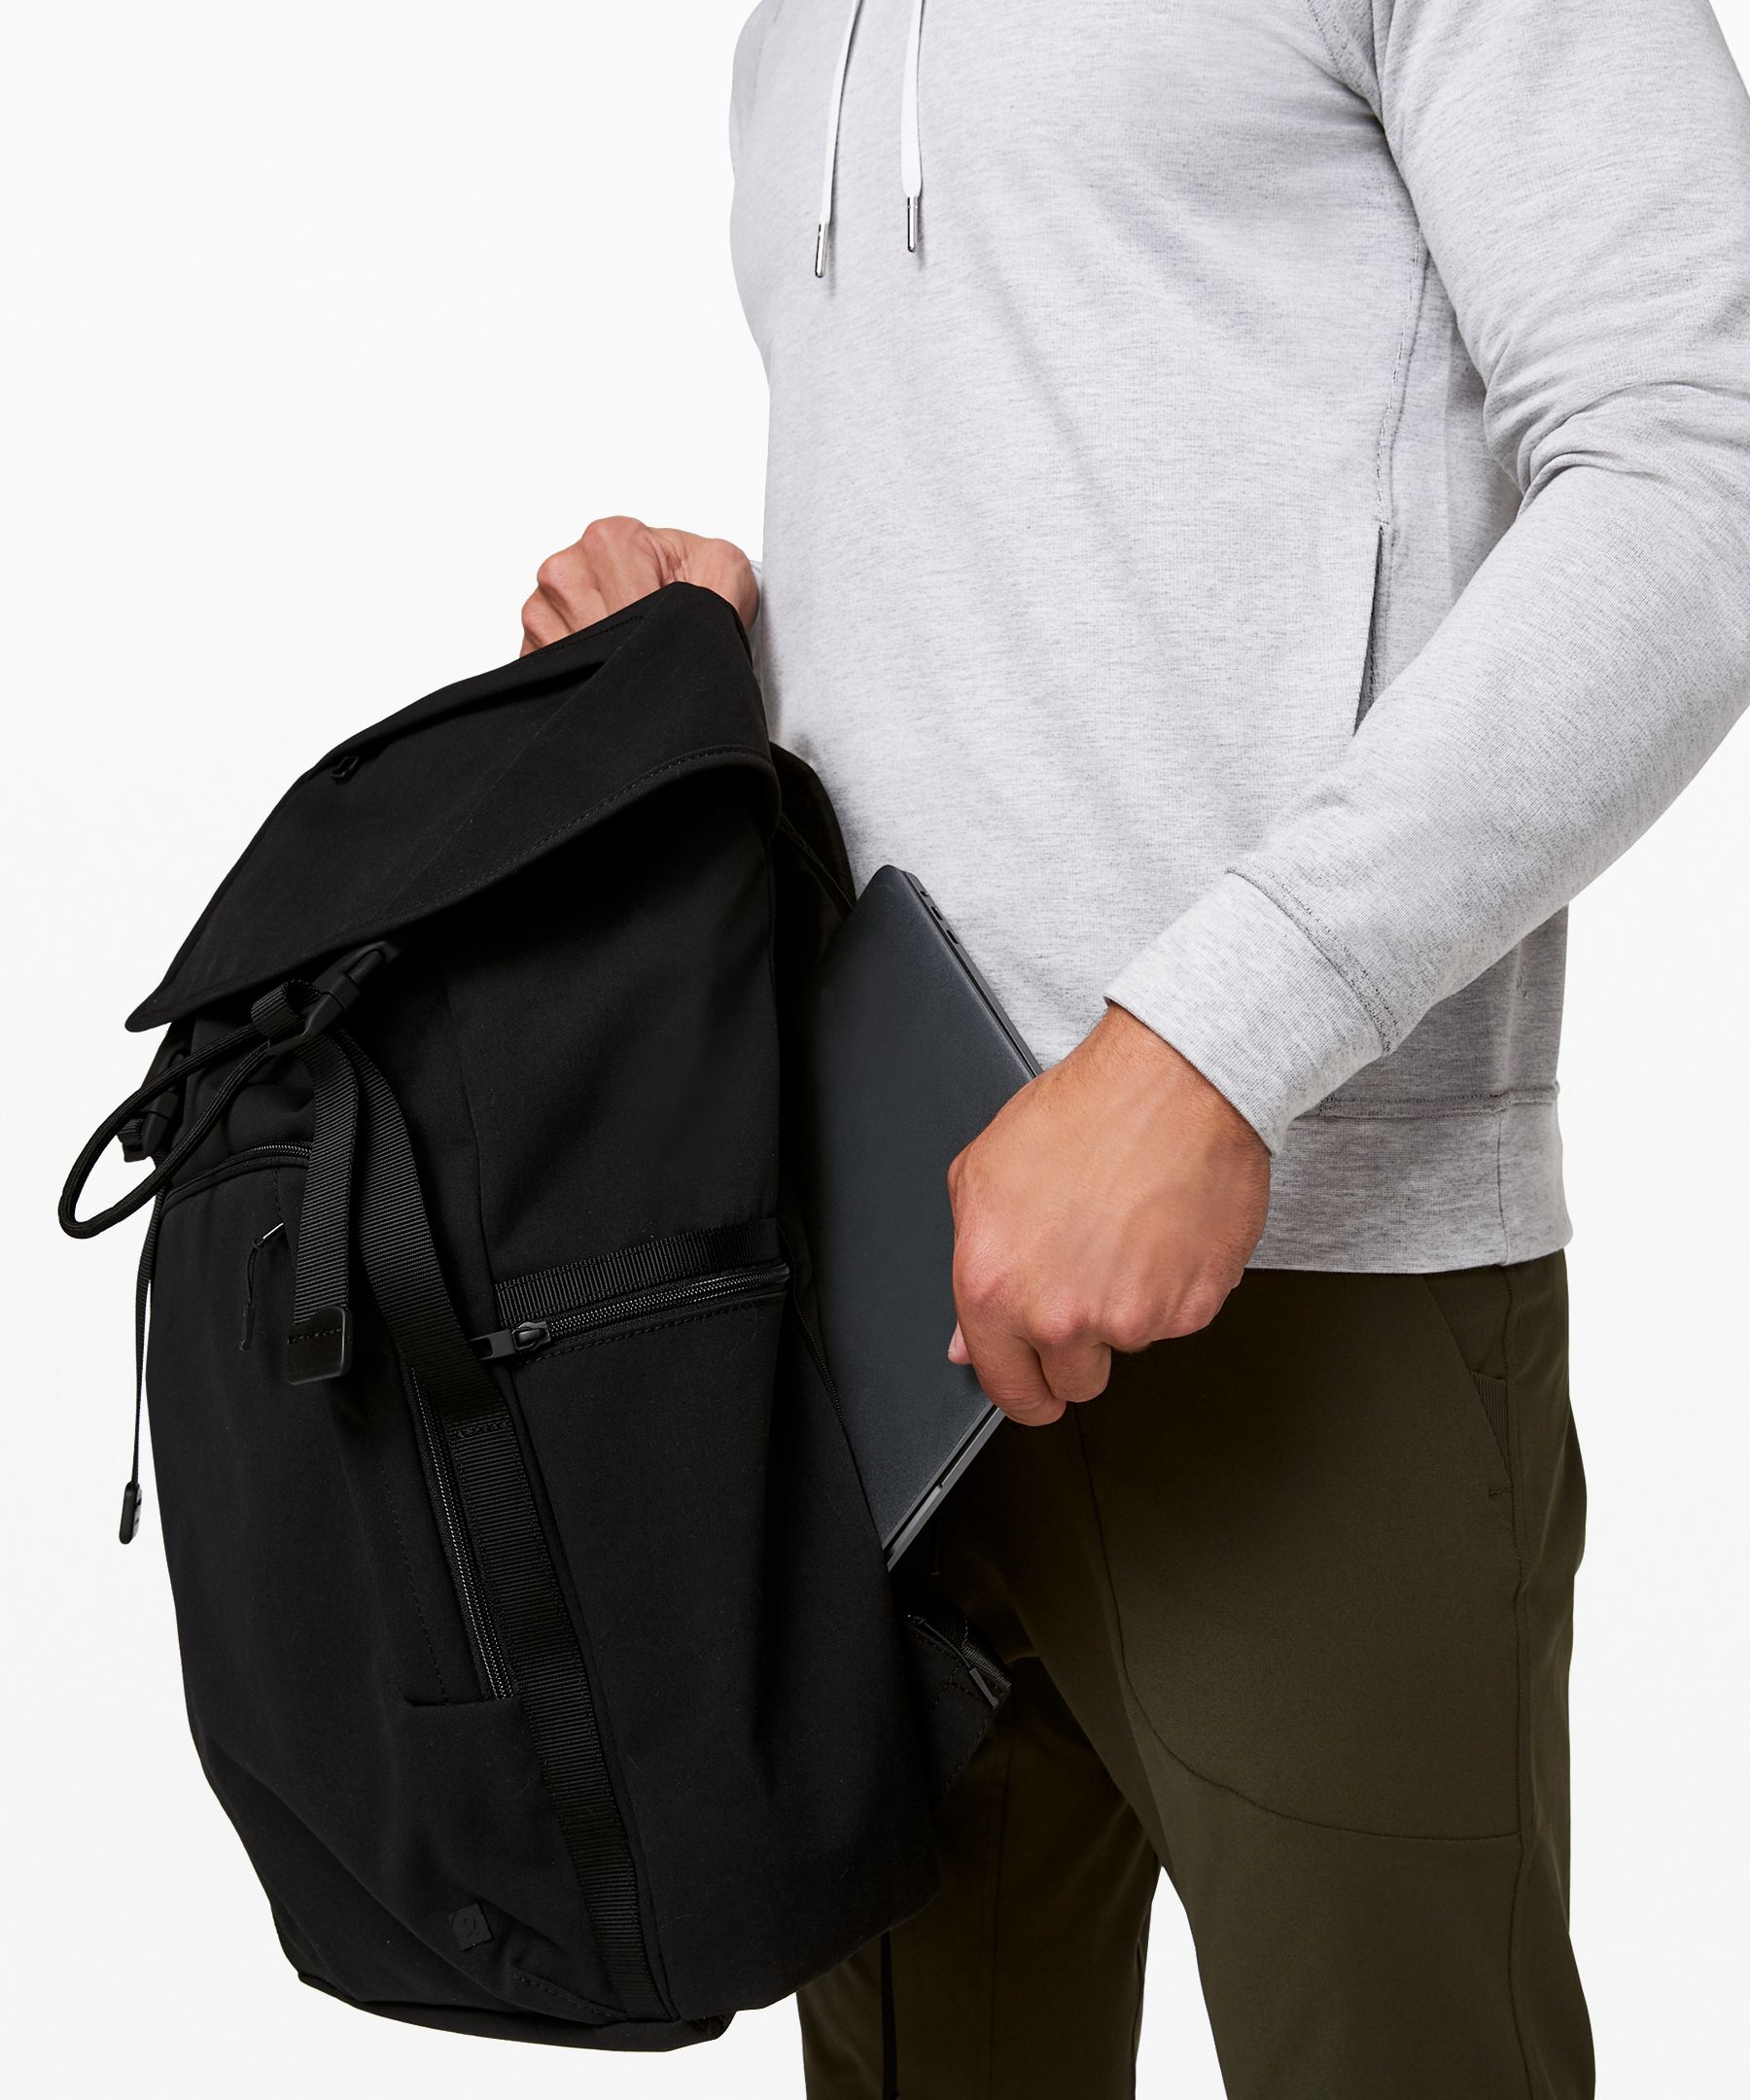 command the day commute bag lululemon